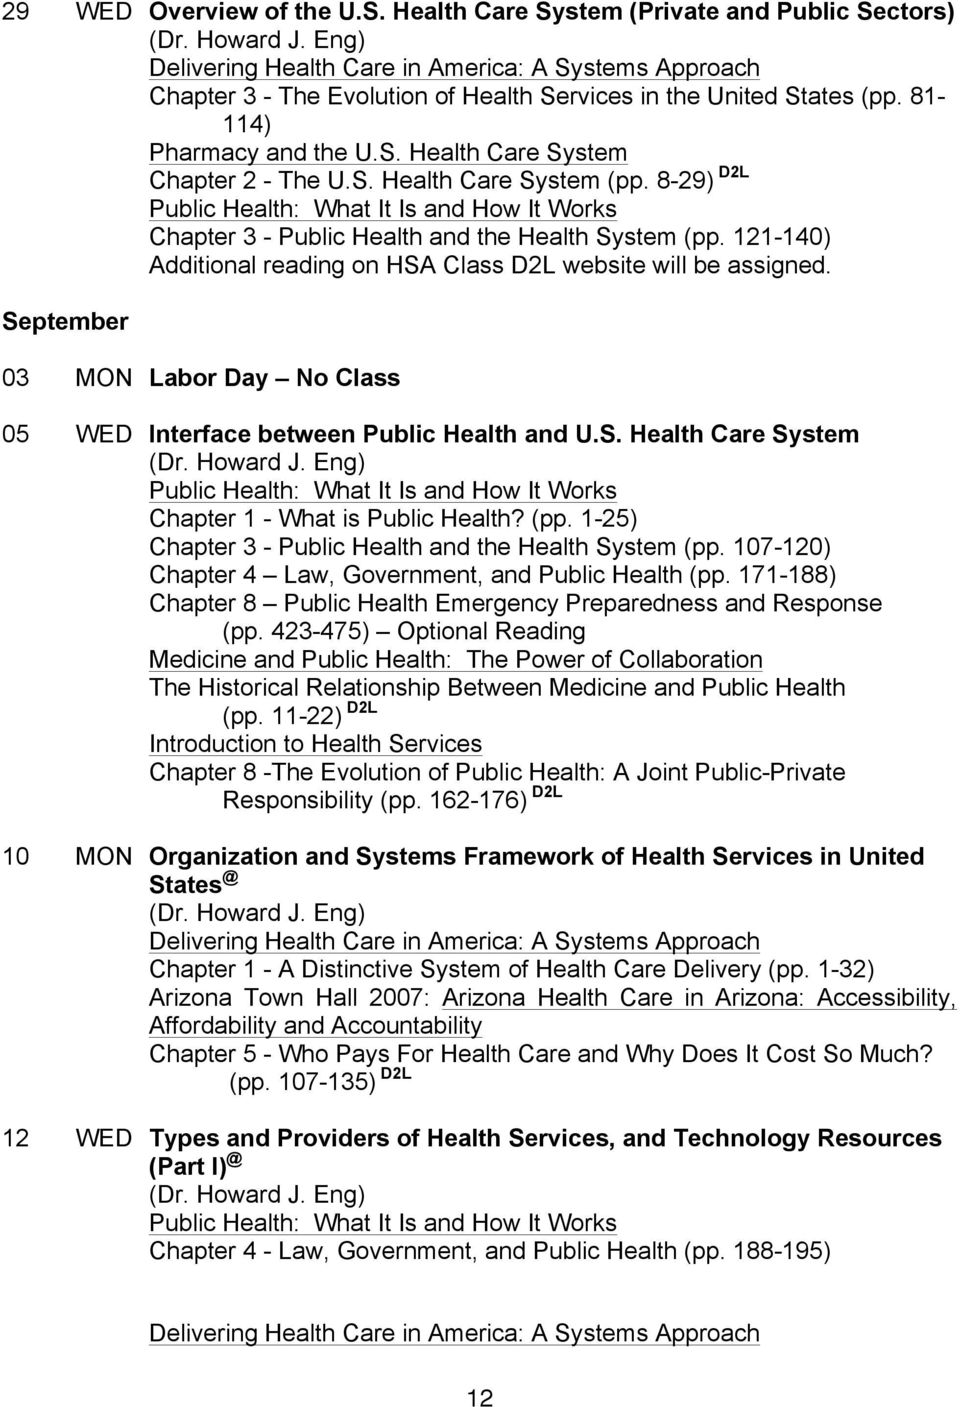 121-140) Additional reading on HSA Class D2L website will be assigned. September 03 MON Labor Day No Class 05 WED Interface between Public Health and U.S. Health Care System Public Health: What It Is and How It Works Chapter 1 - What is Public Health?